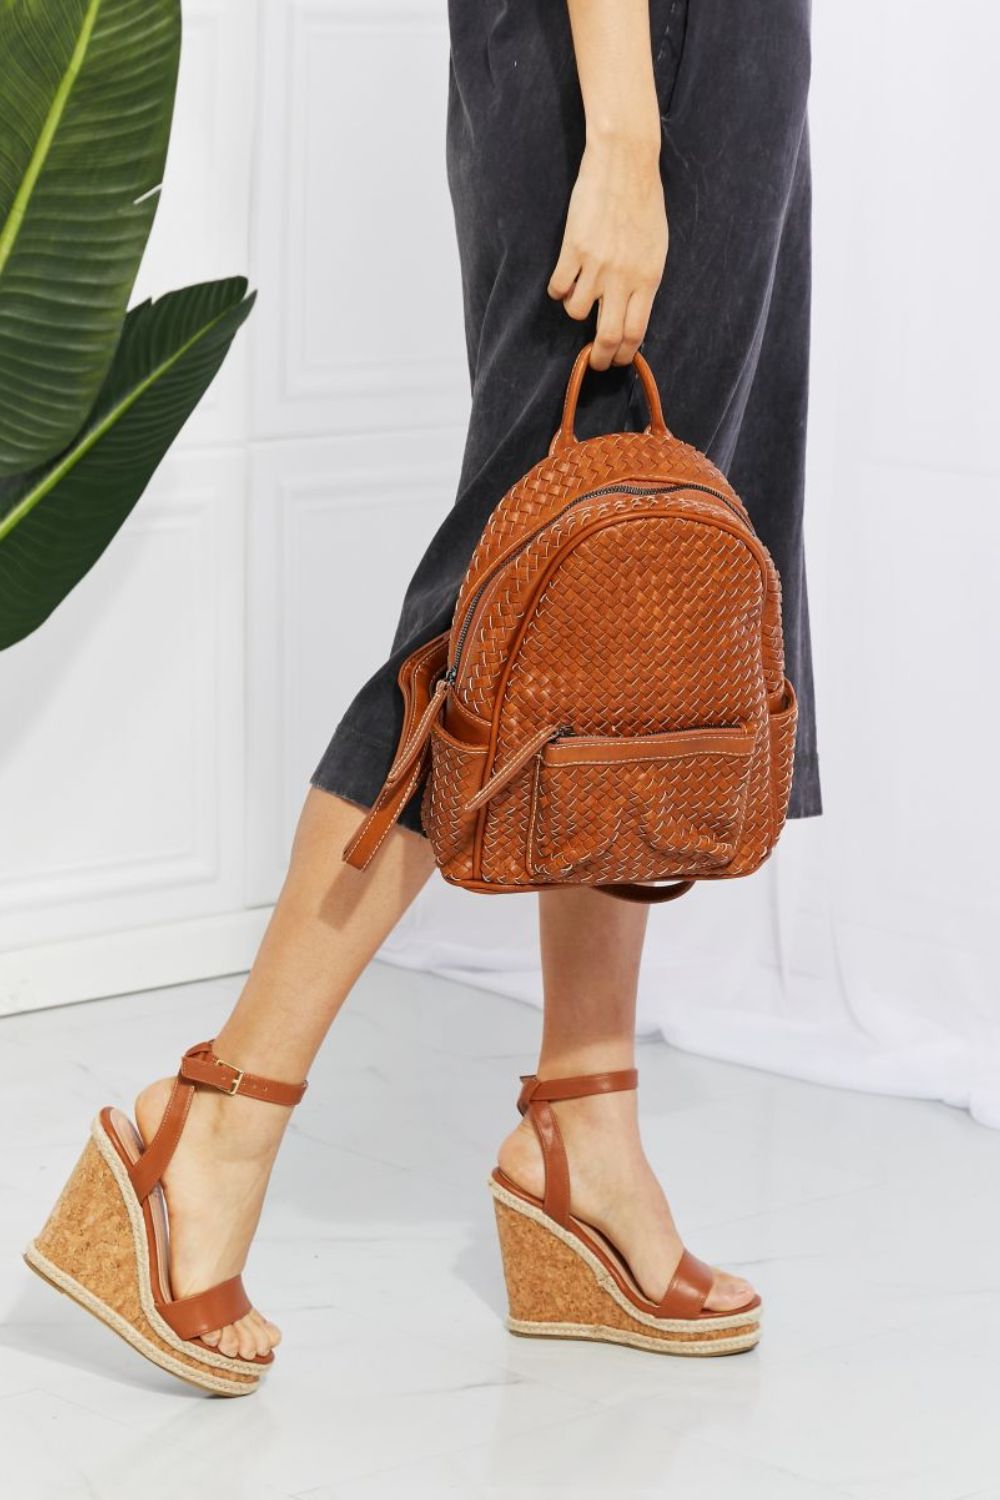 SHOMICO Certainly Chic Faux Leather Woven Backpack SHOMICO